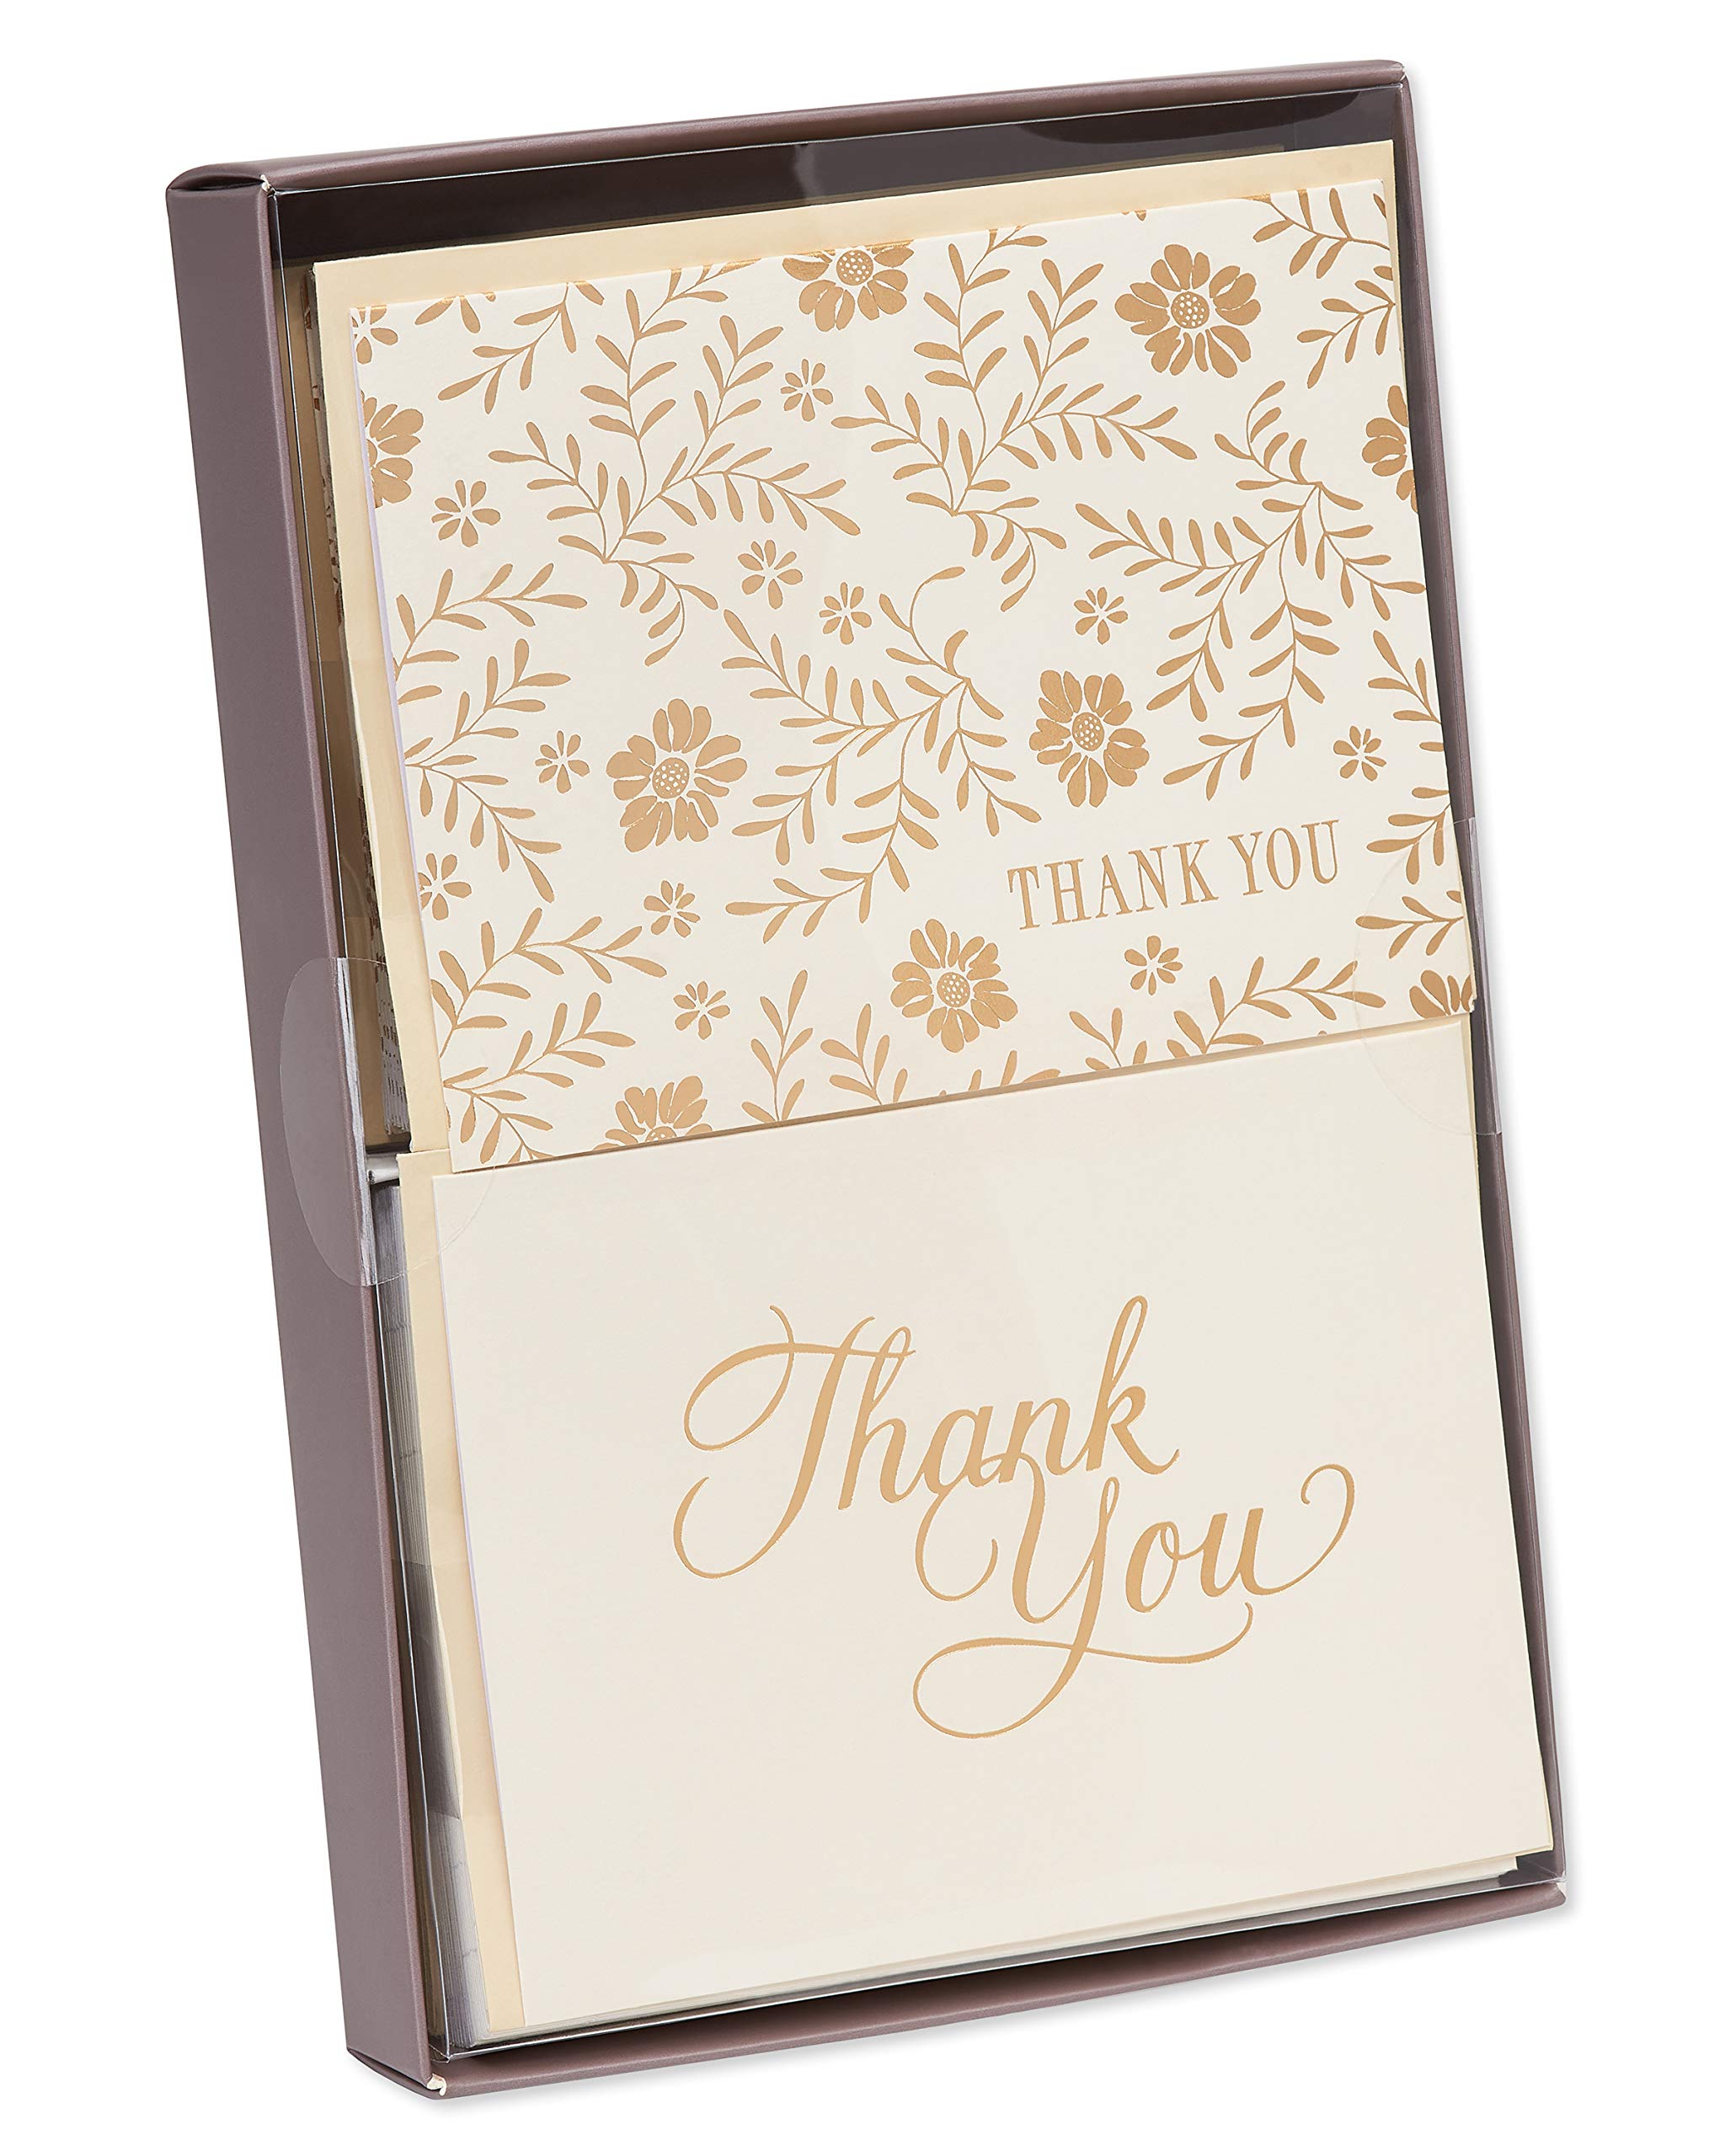 American Greetings Wedding Thank You Cards with Envelopes, Gold and Cream (50-Count)